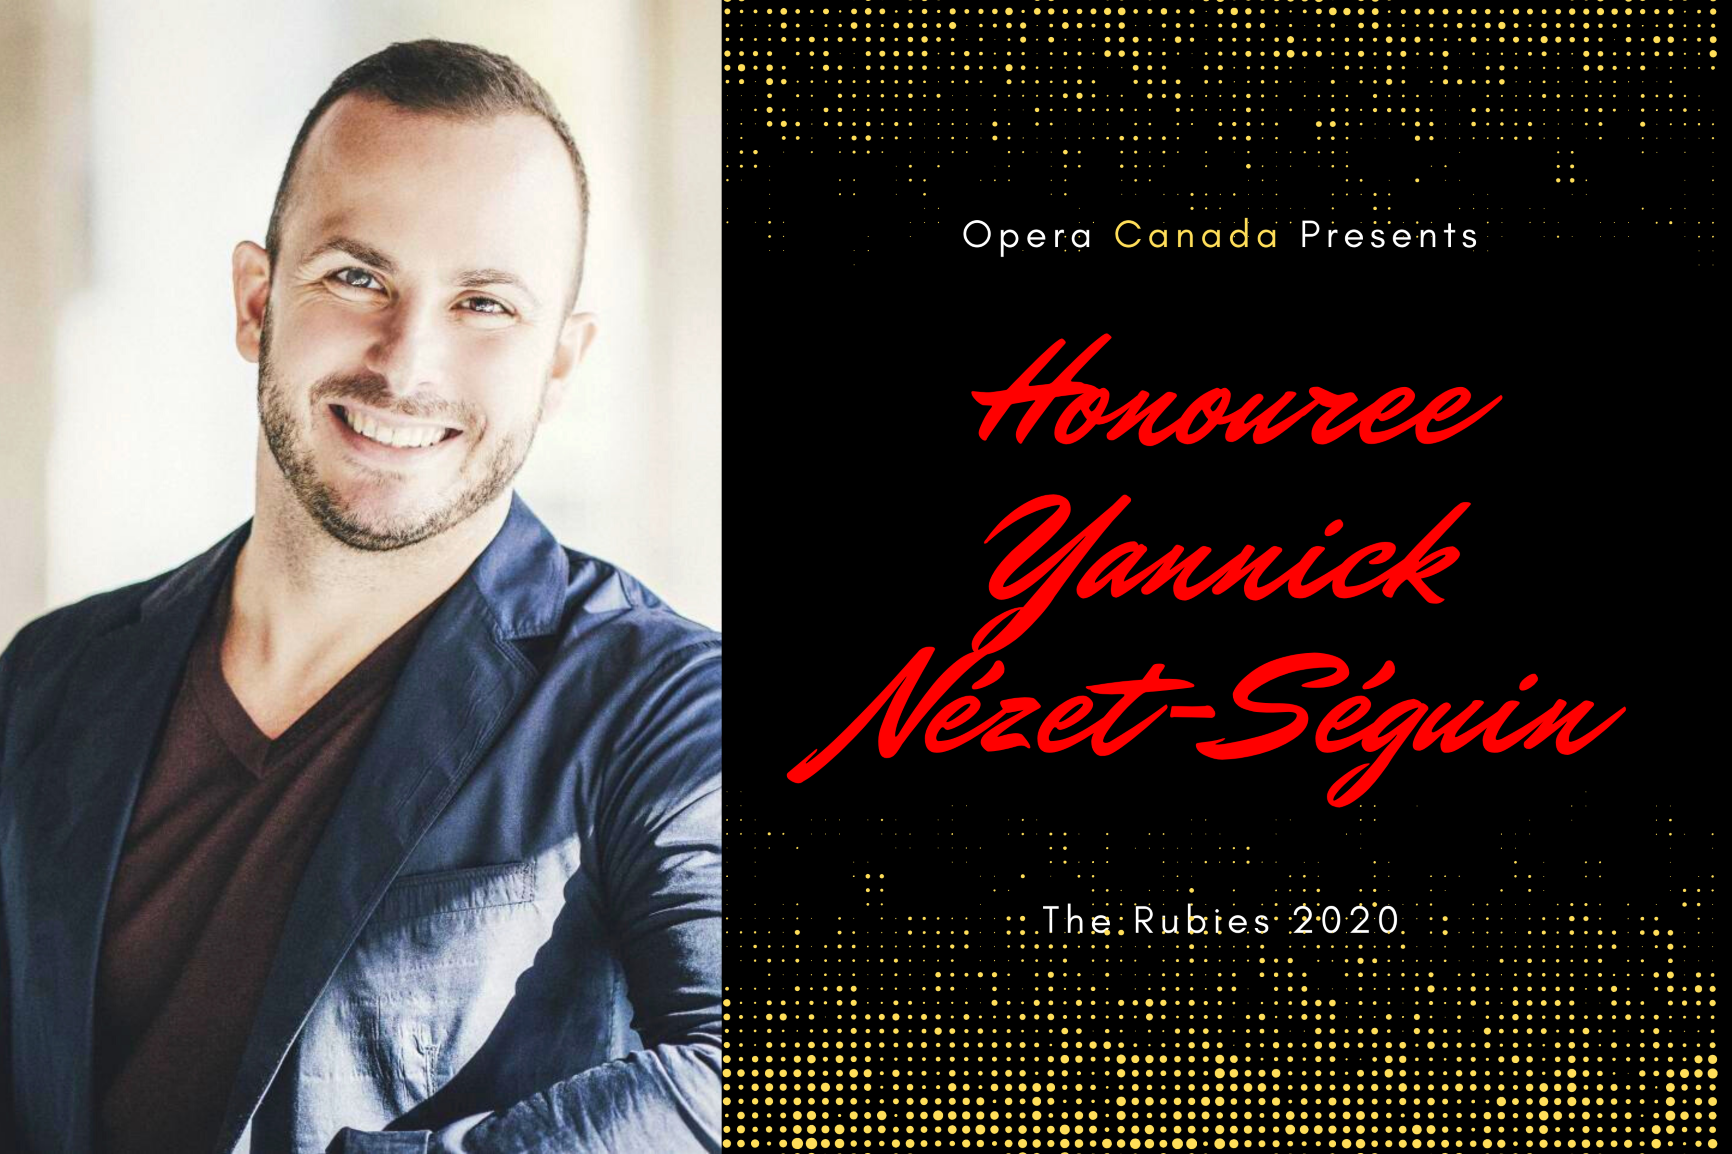 Yannick Nézet-Séguin, Rubies 2020–“We need to listen as much as to guide”